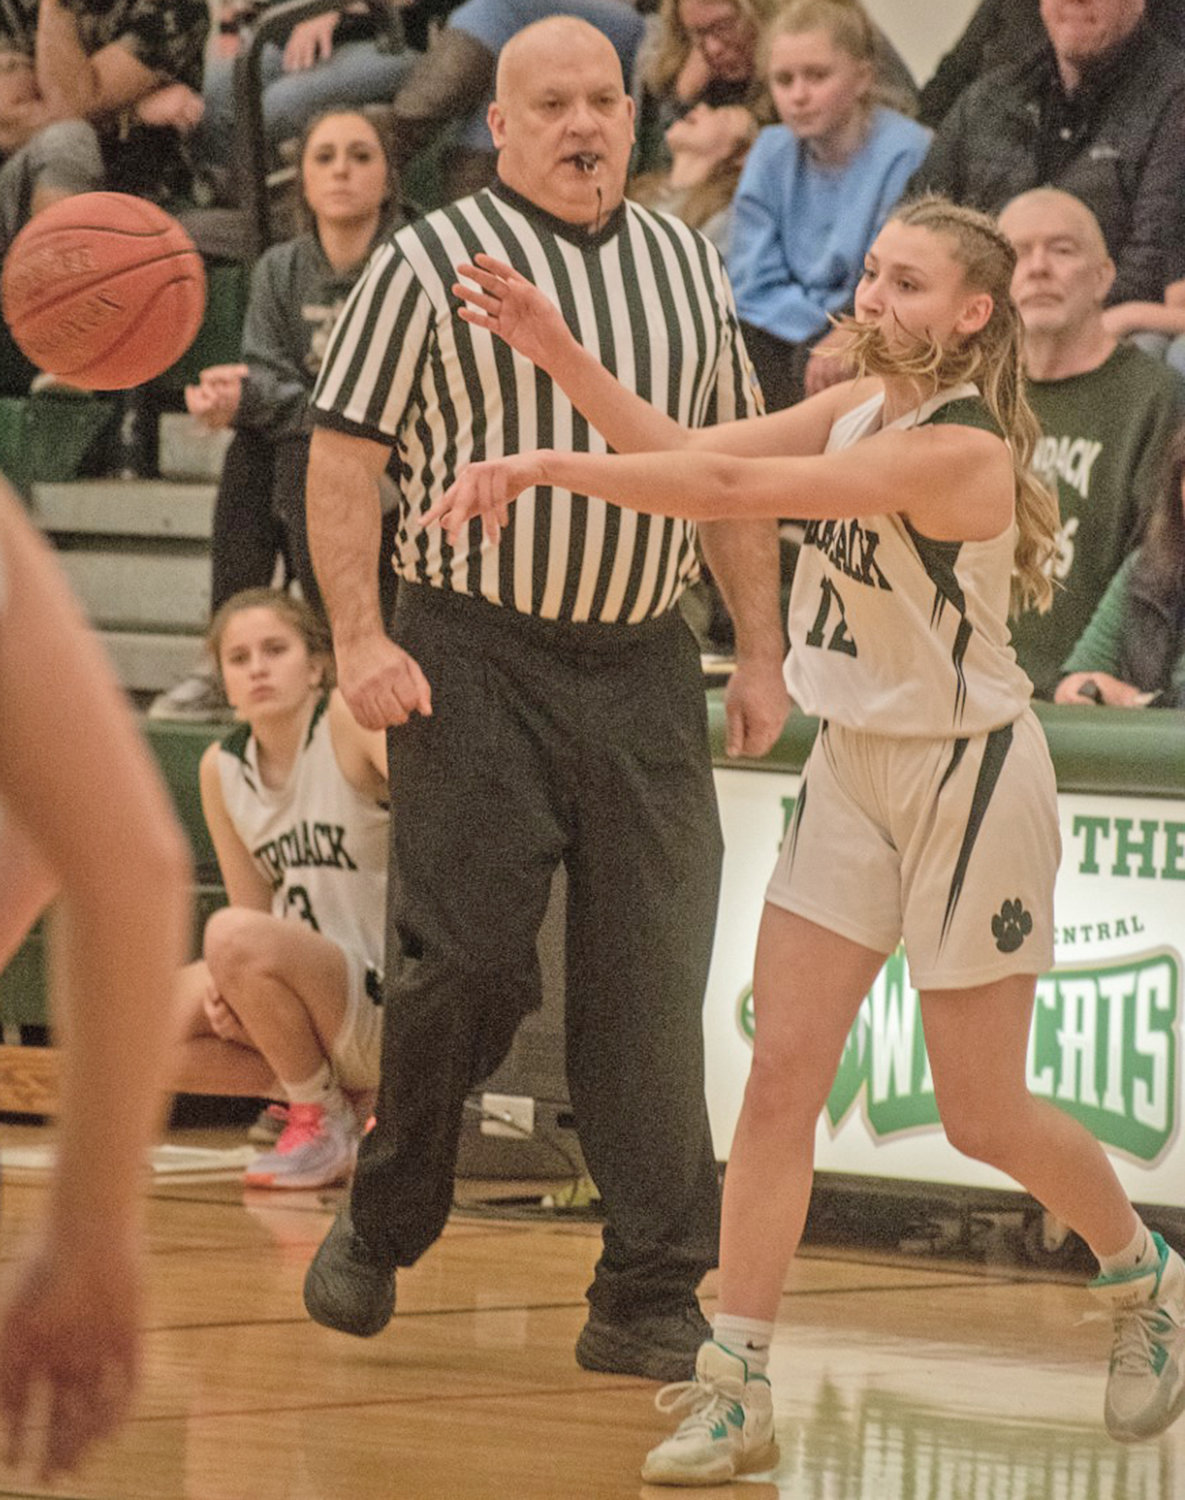 Kaylee Mathis of Adirondack sends a pass to a teammate Monday at home against West Canada Valley. She scored four points but the Wildcats lost 59-46.